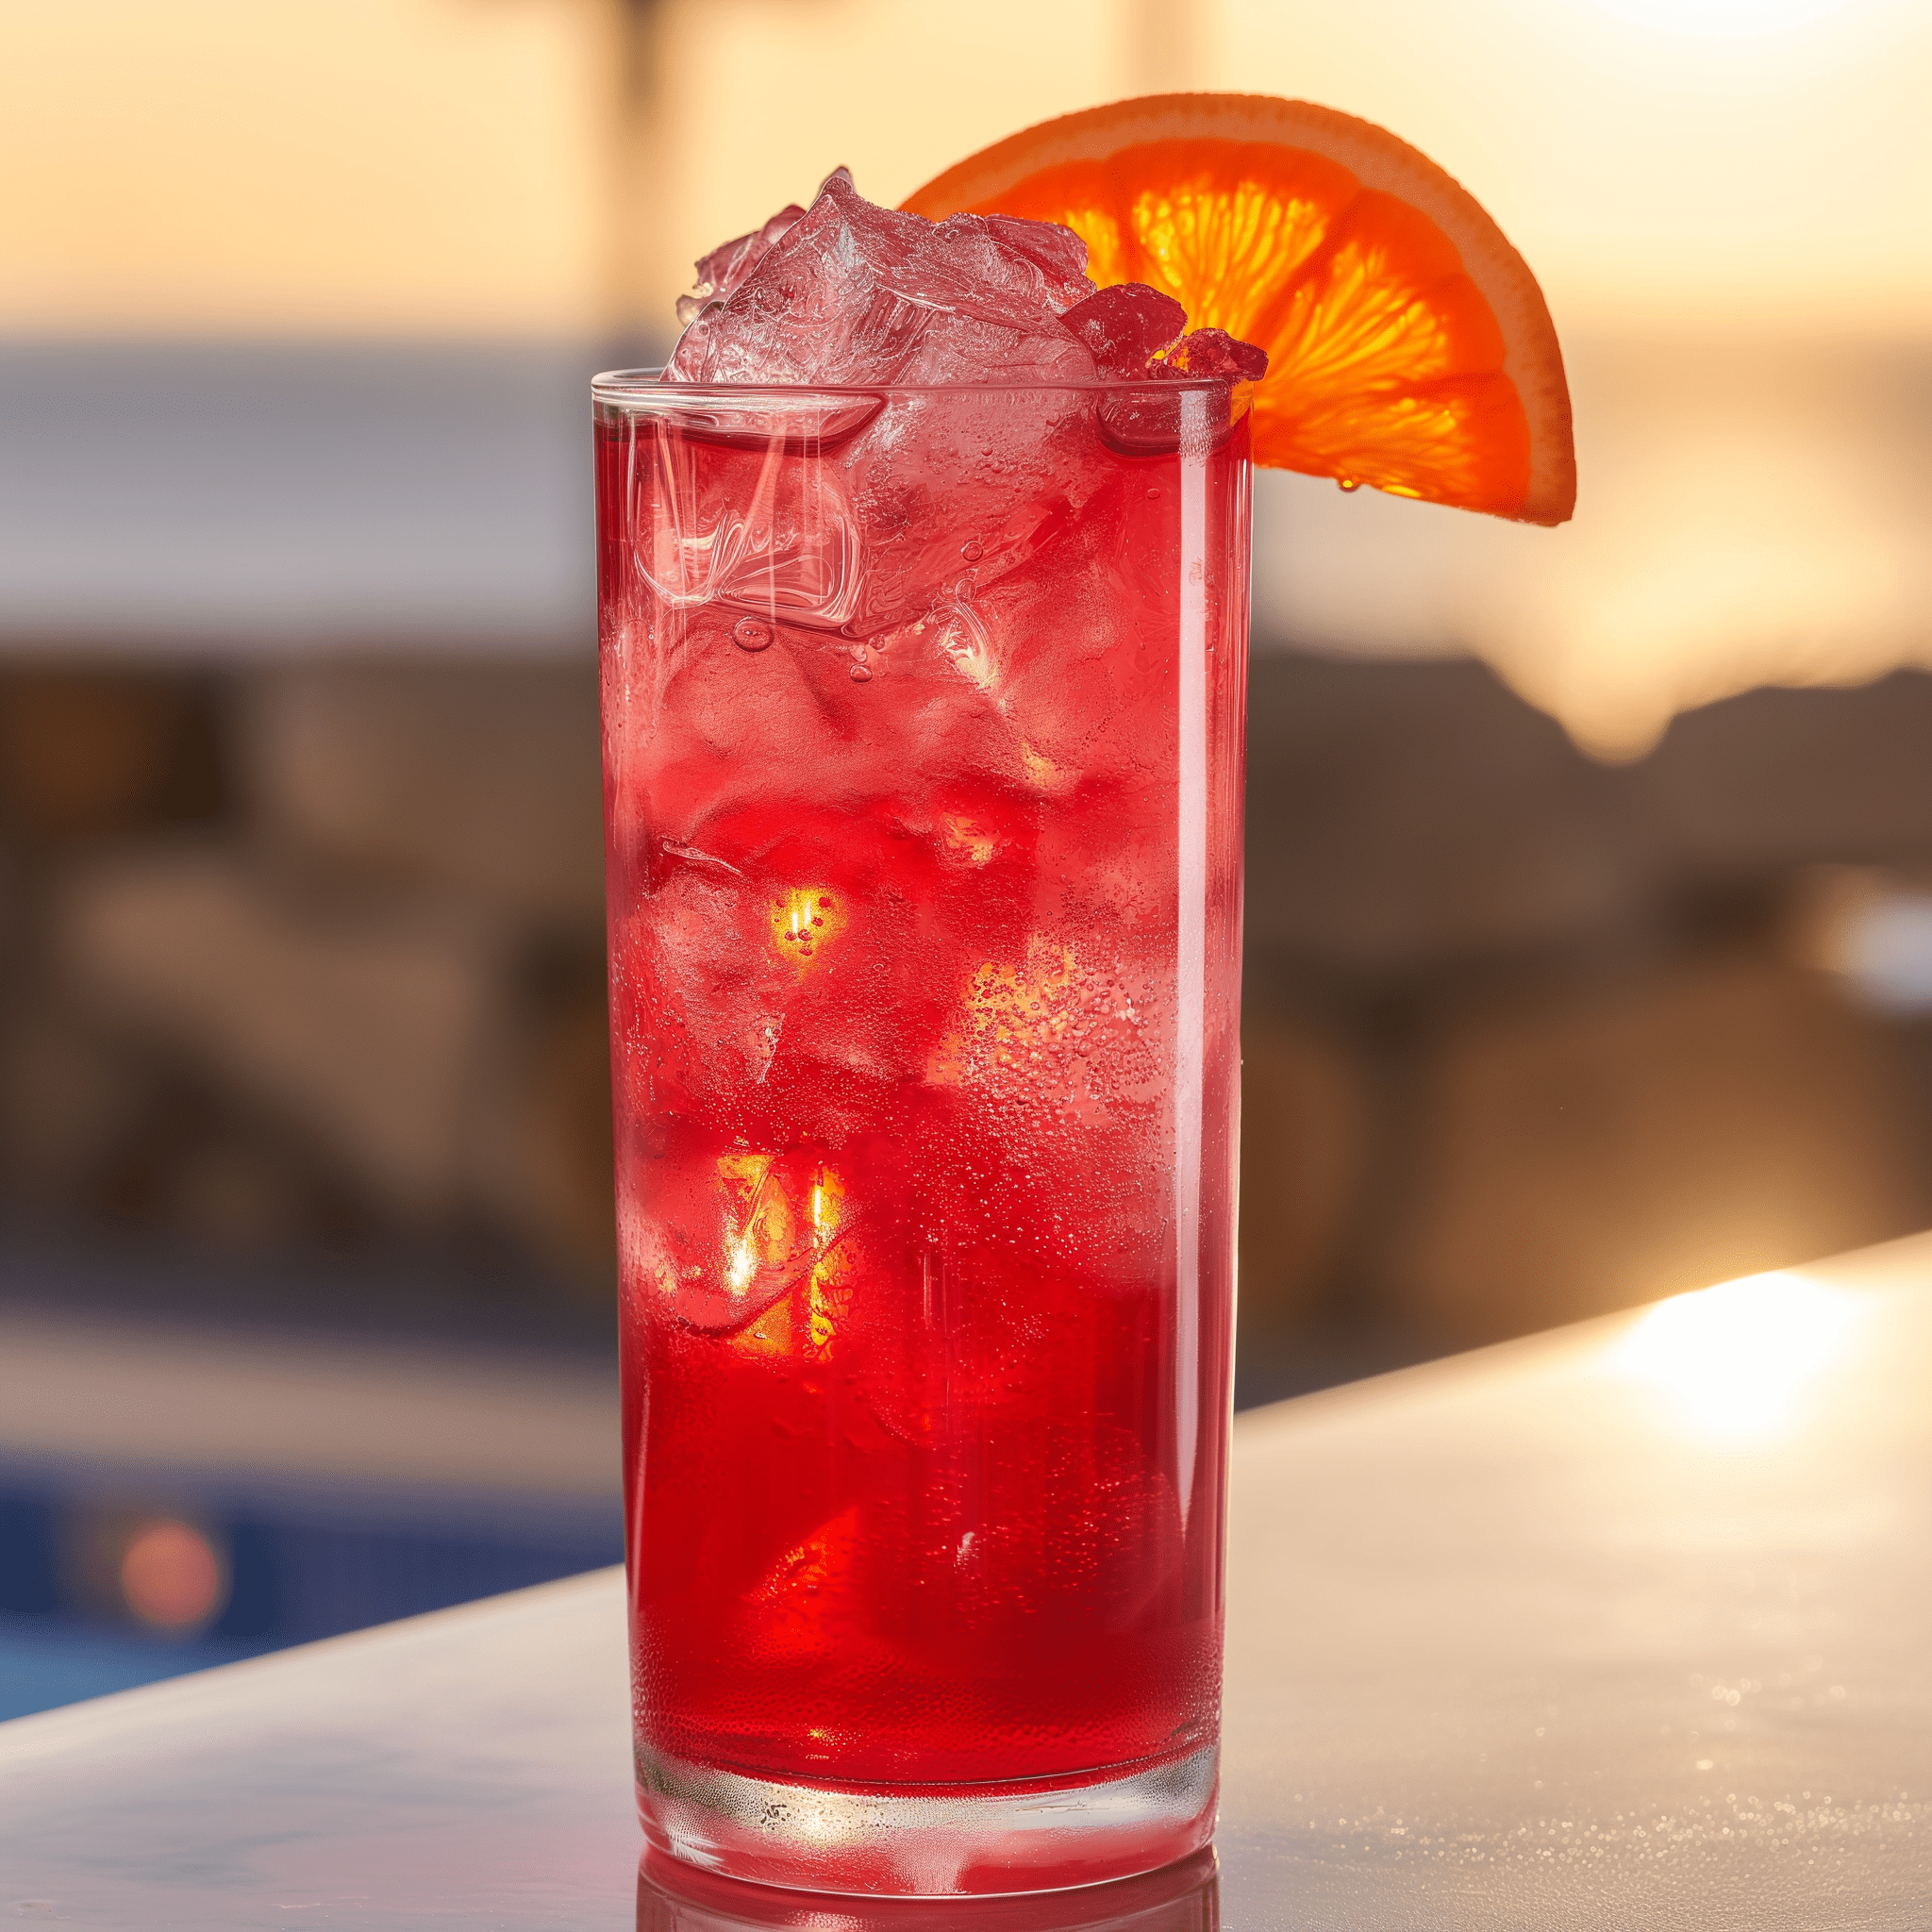 Campari Tonic Cocktail Recipe - The Campari Tonic has a distinctly bitter and herbal taste with a hint of sweetness from the Campari. The tonic water adds a quinine bitterness and a fizzy texture that lightens the drink. It's a balanced mix of bitter, sweet, and bubbly.